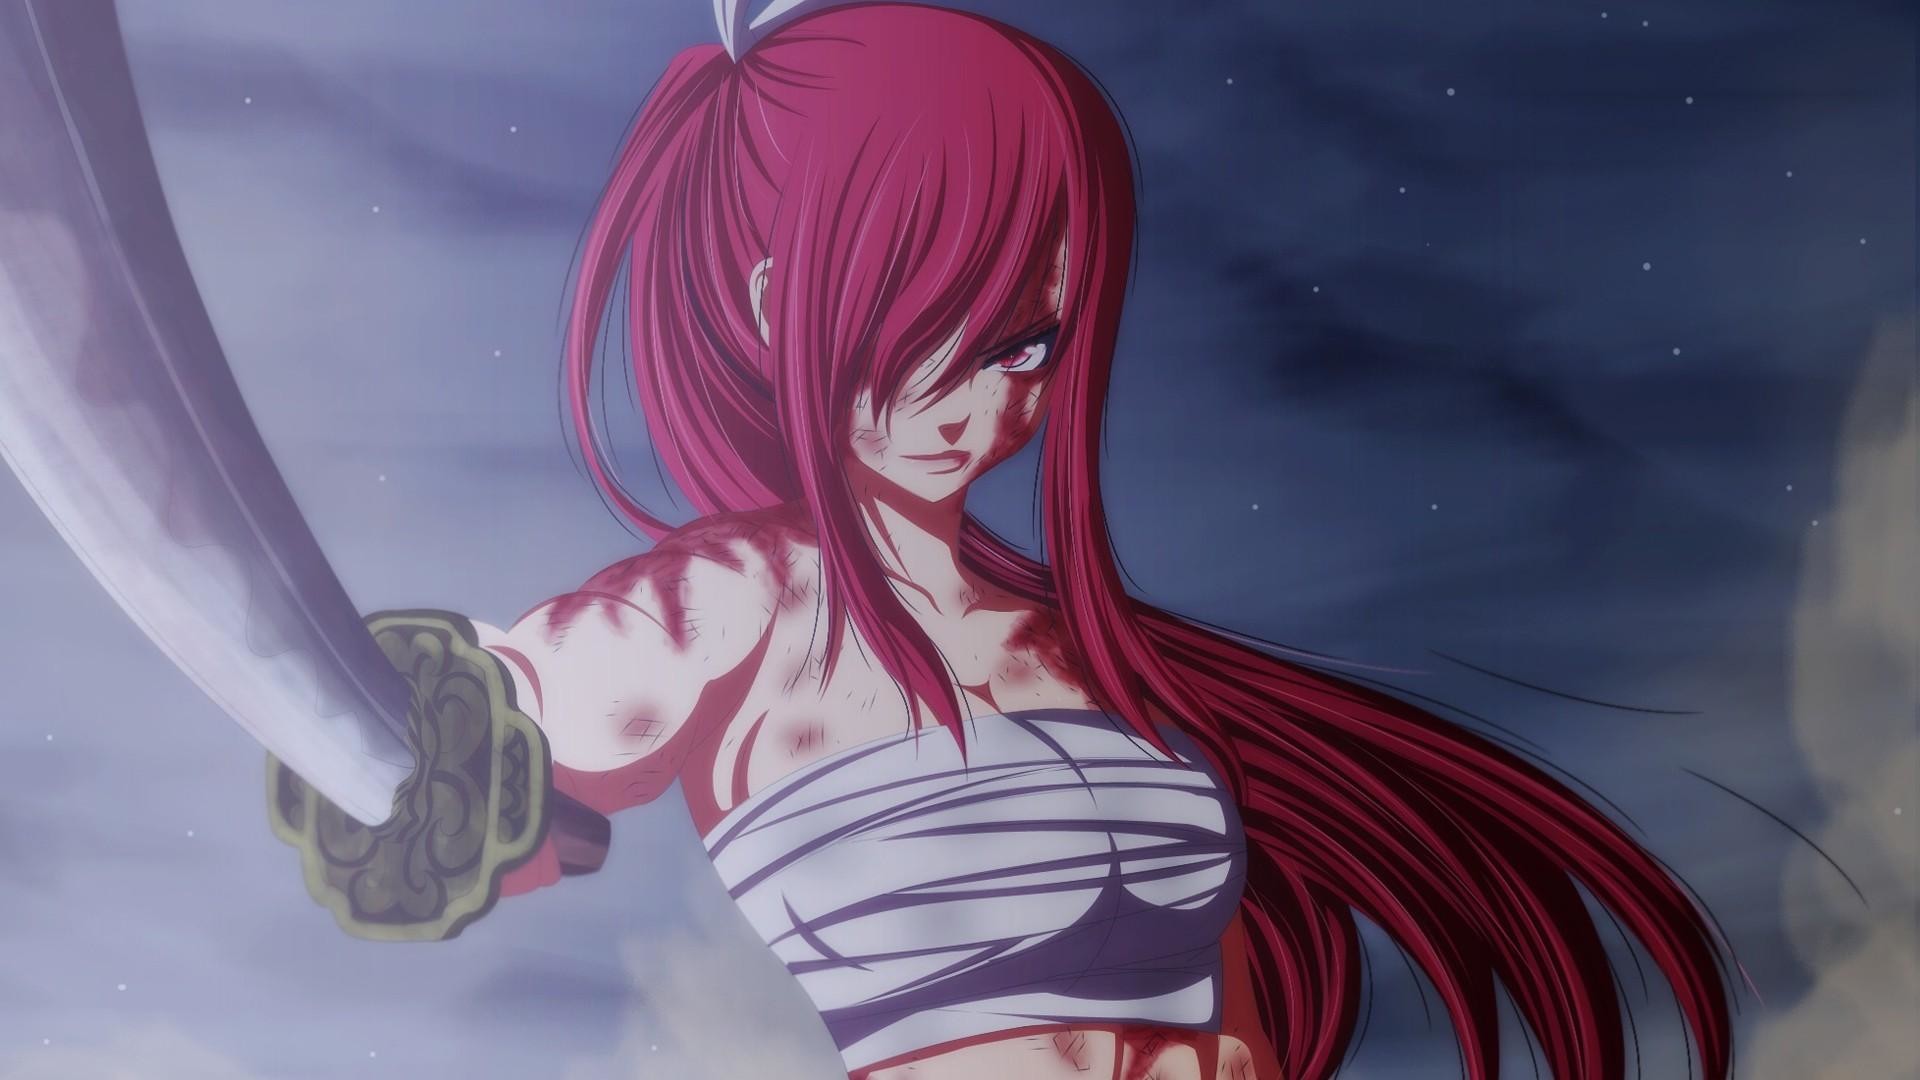 Title. Fairy Tail – Erza Scarlet